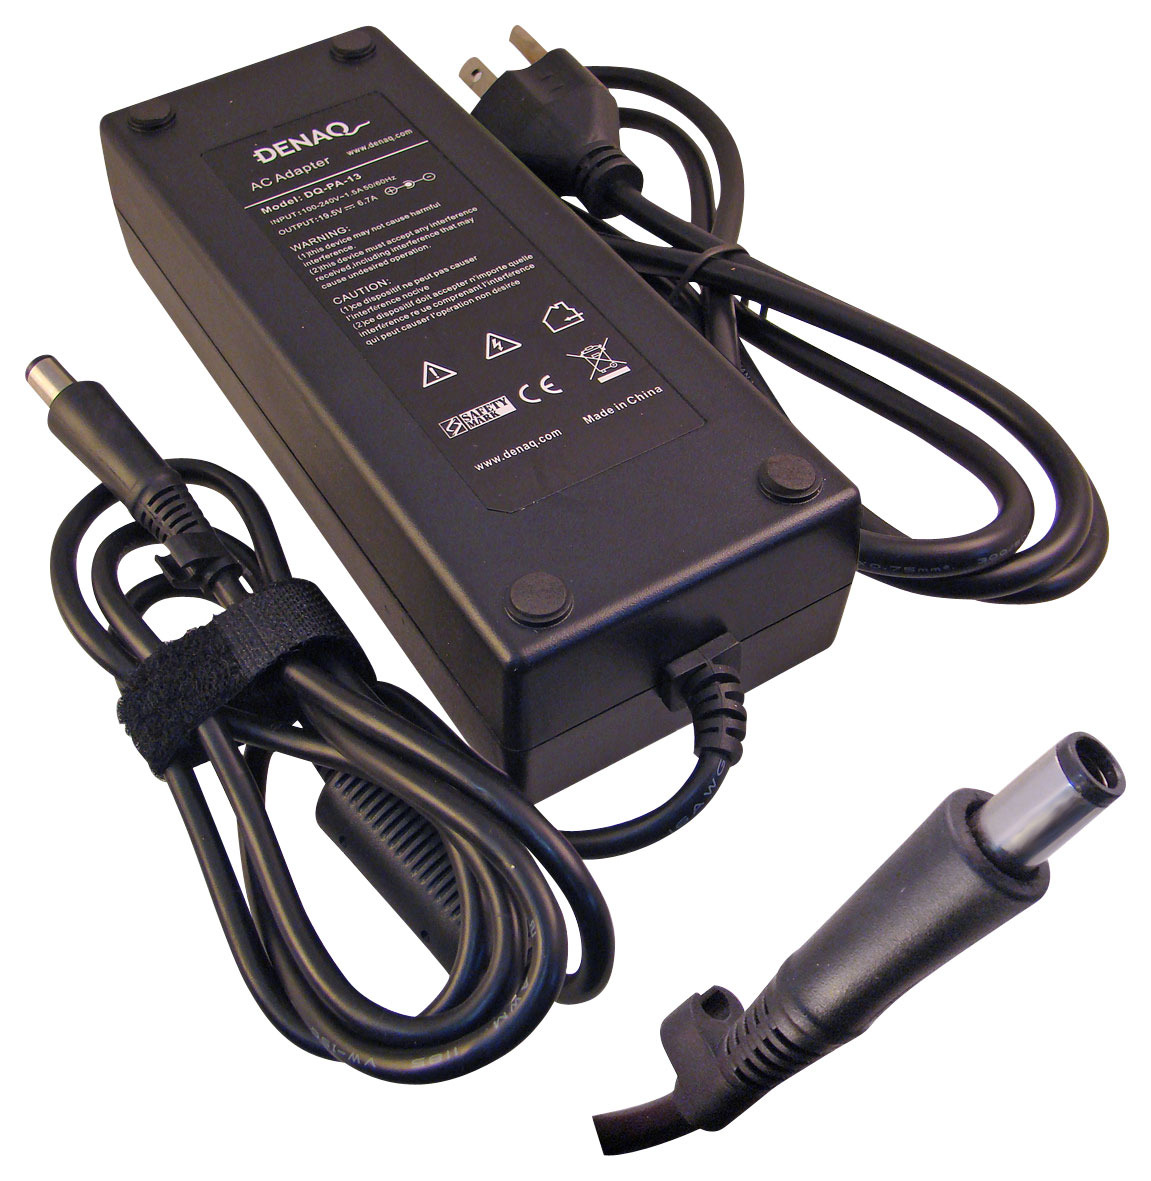 DENAQ AC Power Adapter and Charger for Select Dell Precision, Inspiron and  XPS Laptops Black DQ-PA-13-7450 - Best Buy